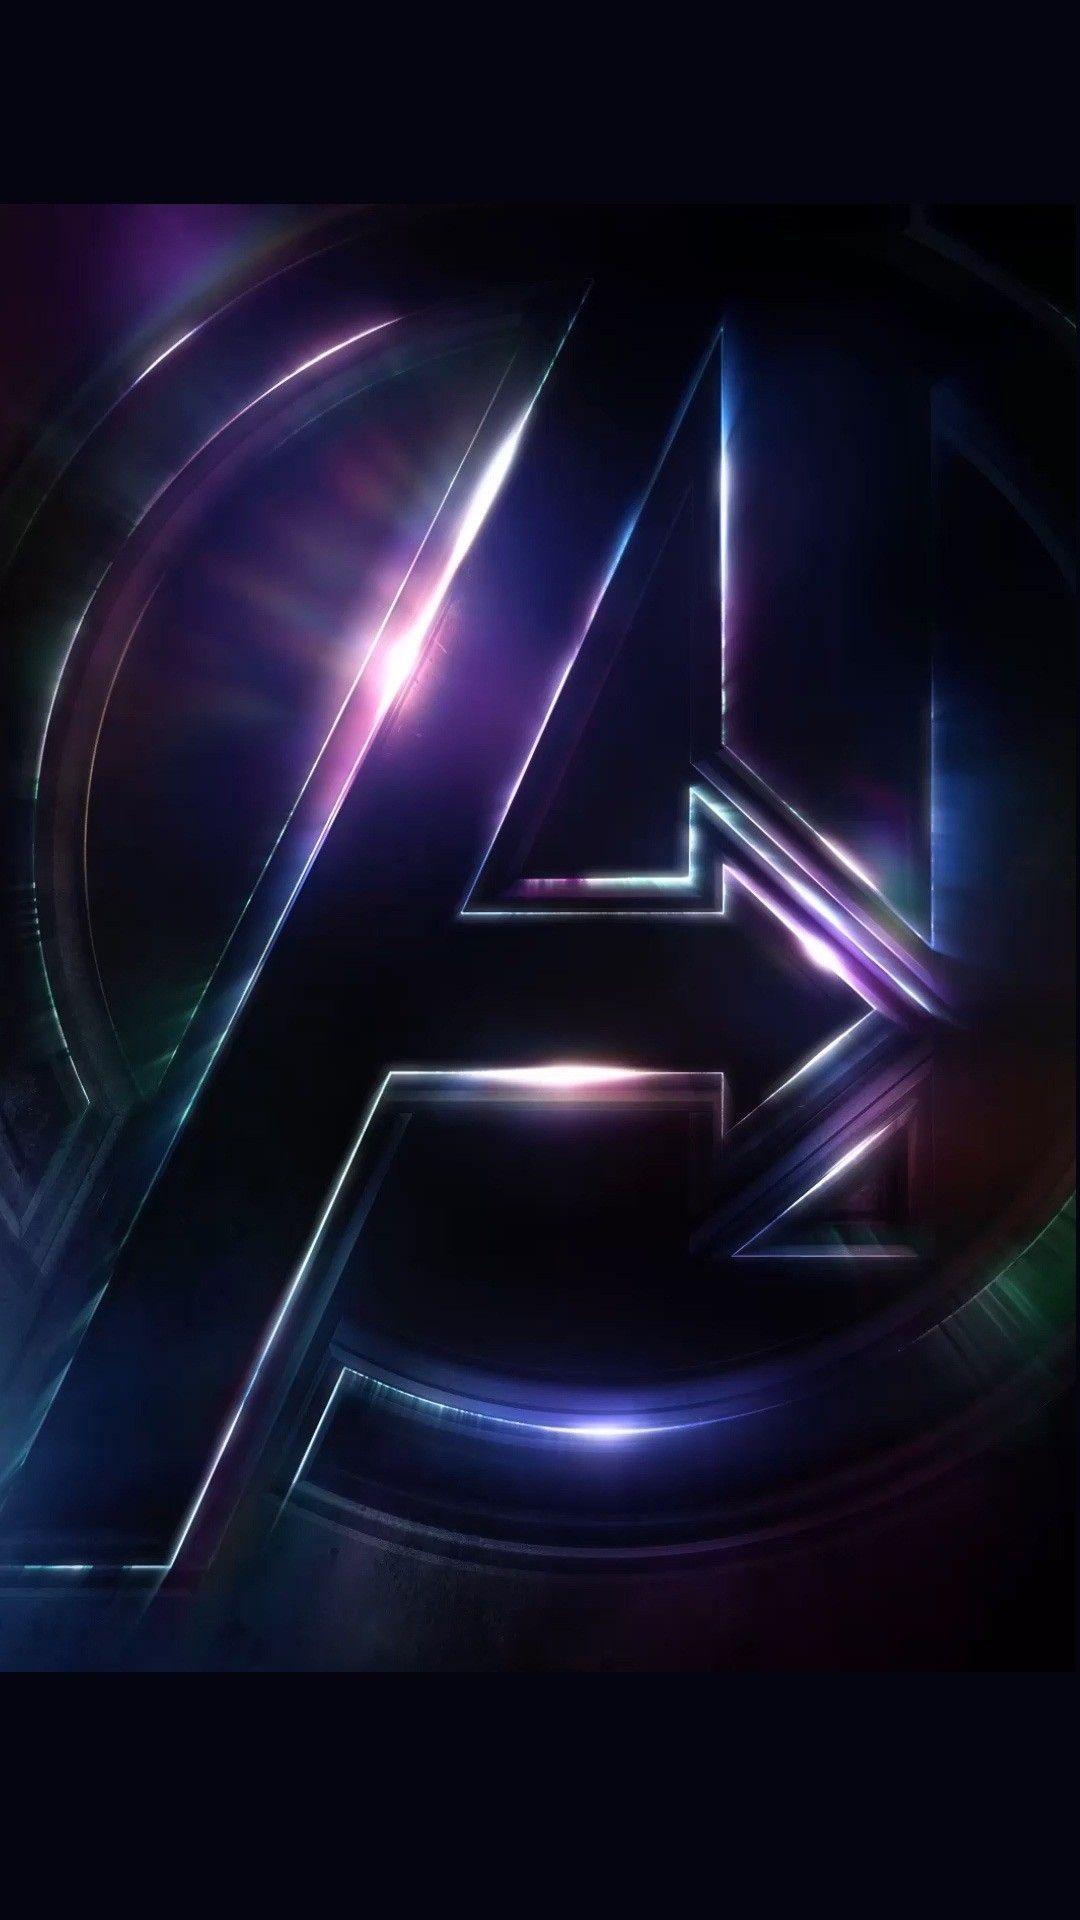 Avengers Infinity War Android Wallpaper Android Wallpaper